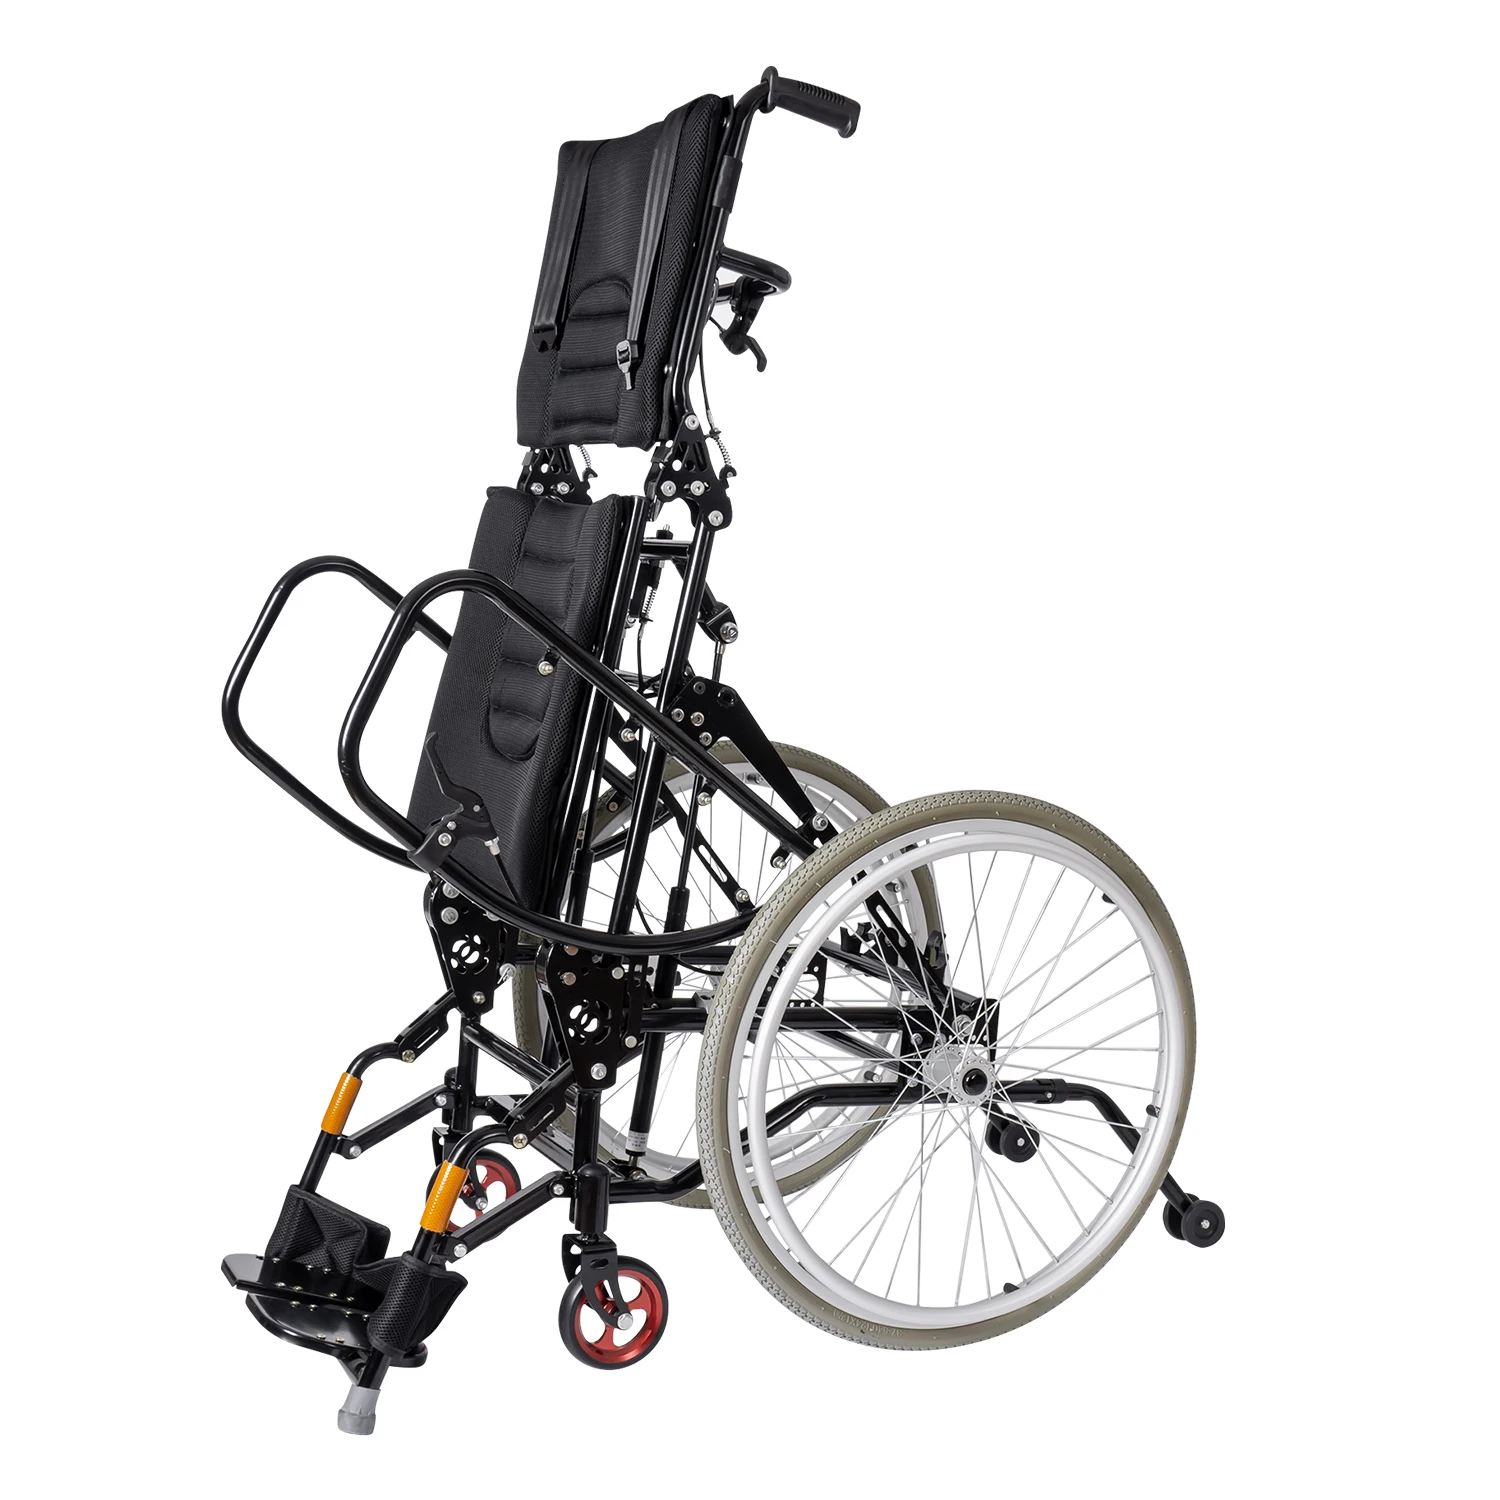 Cheap price foldable portable manual standing wheelchair can achieve self-help standing and perform rehabilitation exercises